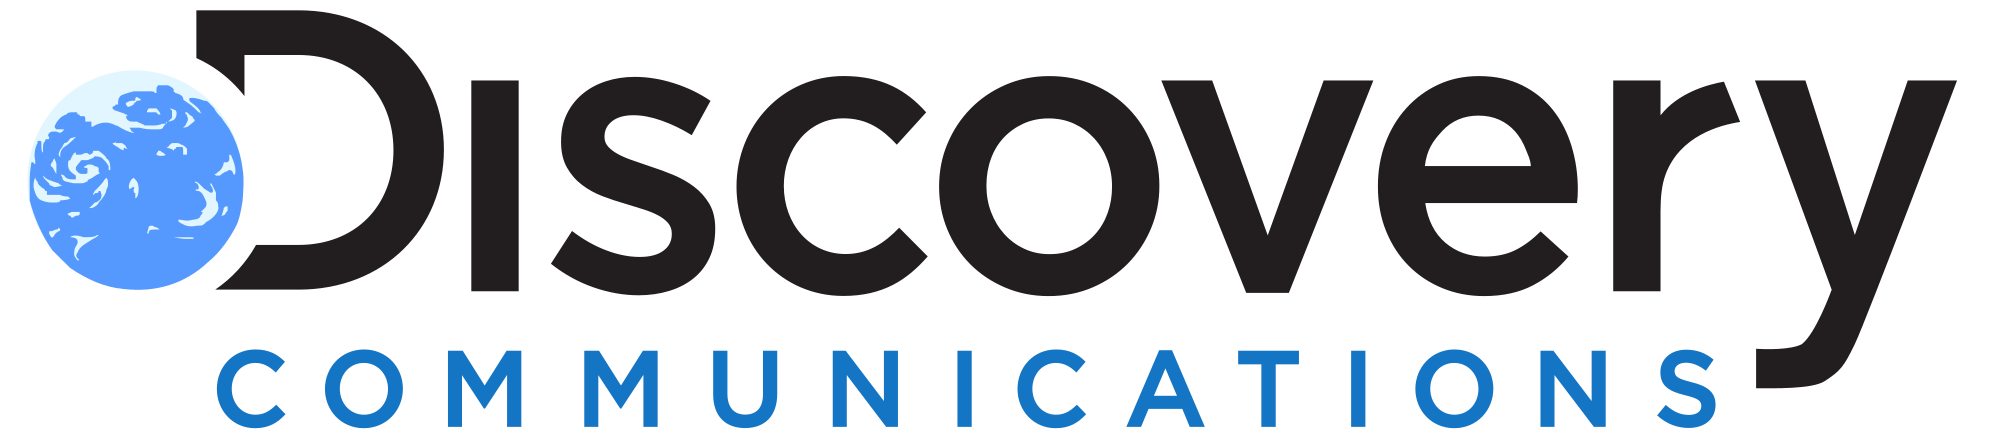 Dicovery Communications logo image in blue and black